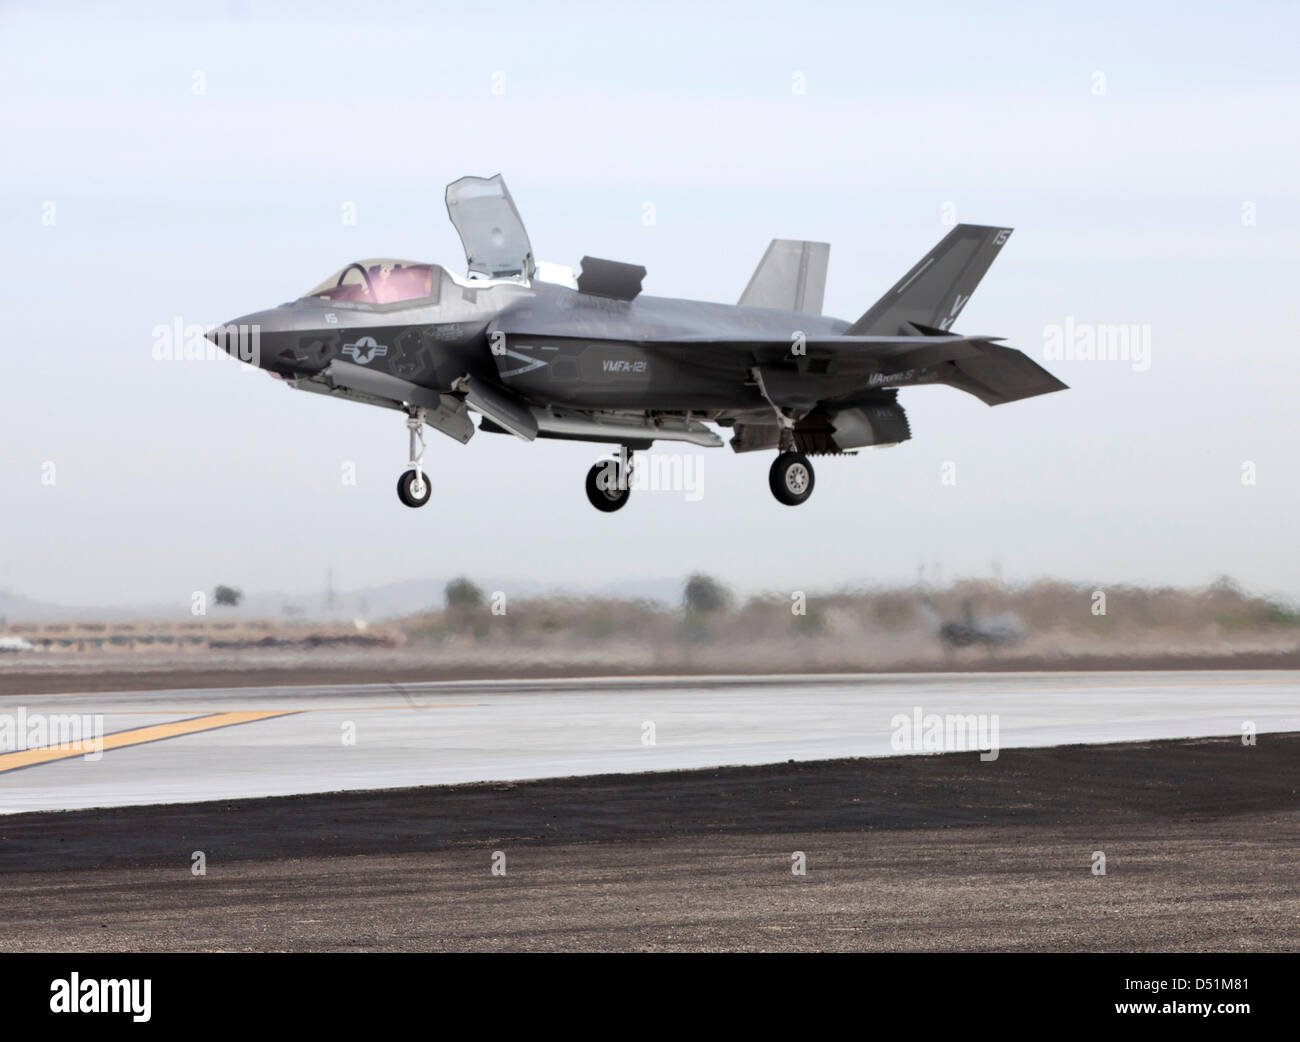 A US Marine Corps F-35B Lightning II stealth fighter aircraft makes the first operational short take off and vertical landing March 21, 2013 at Marine Corps Air Station Yuma, AZ. Stock Photo